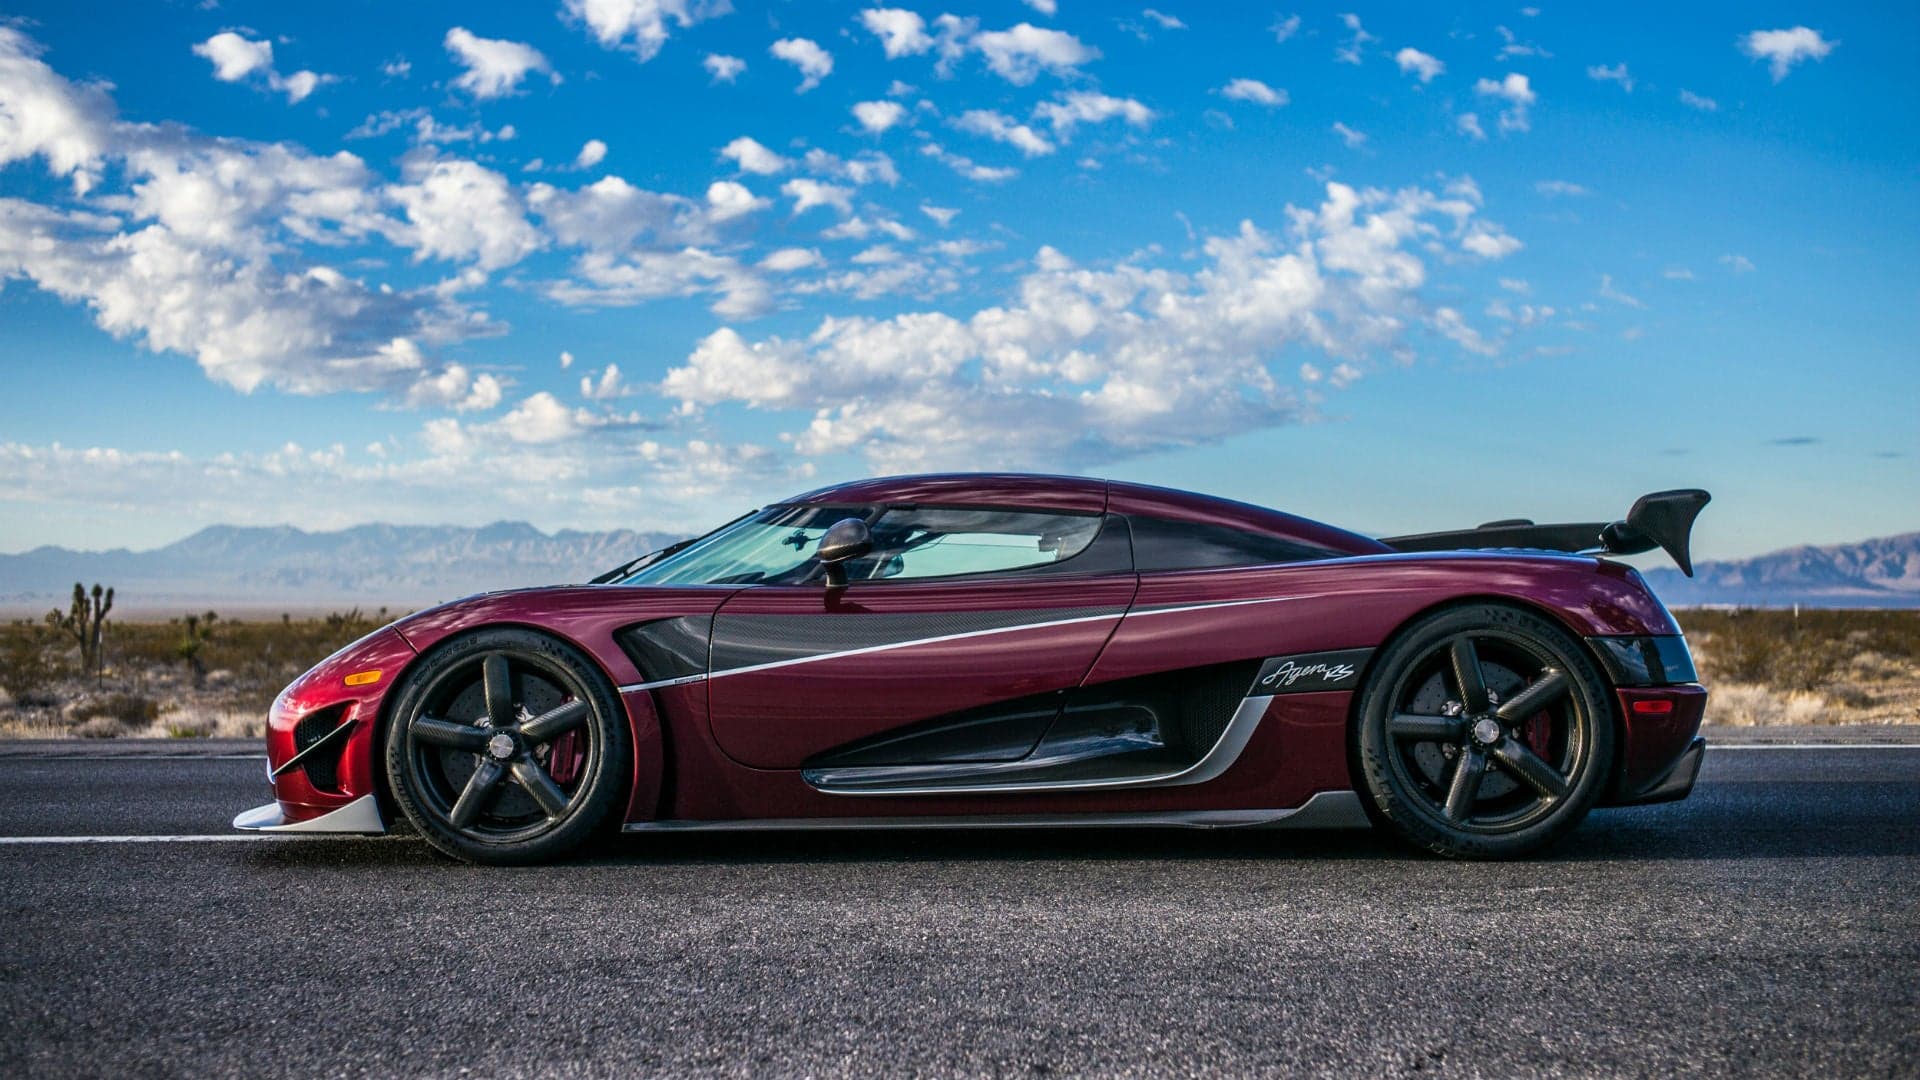 Koenigsegg to Increase Production by Thousands, Compete With ‘Mainstream’ Supercar Makers